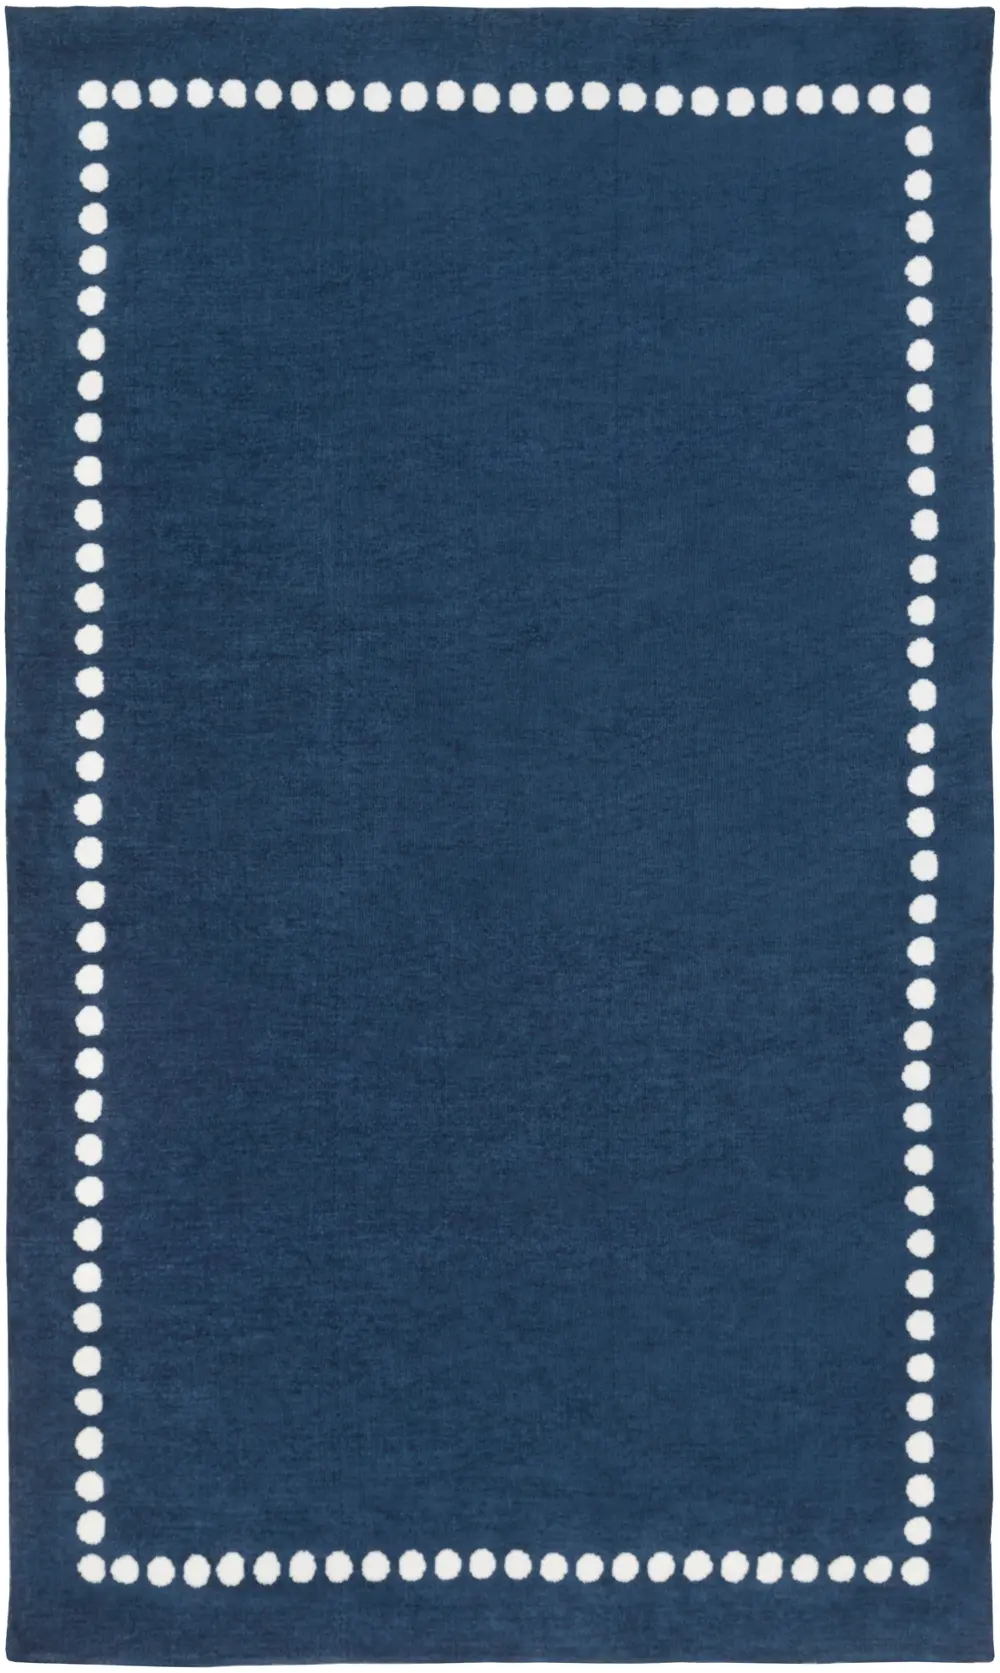 3 x 5 Small Navy Blue and Cream Kids Area Rug - Abigail-1